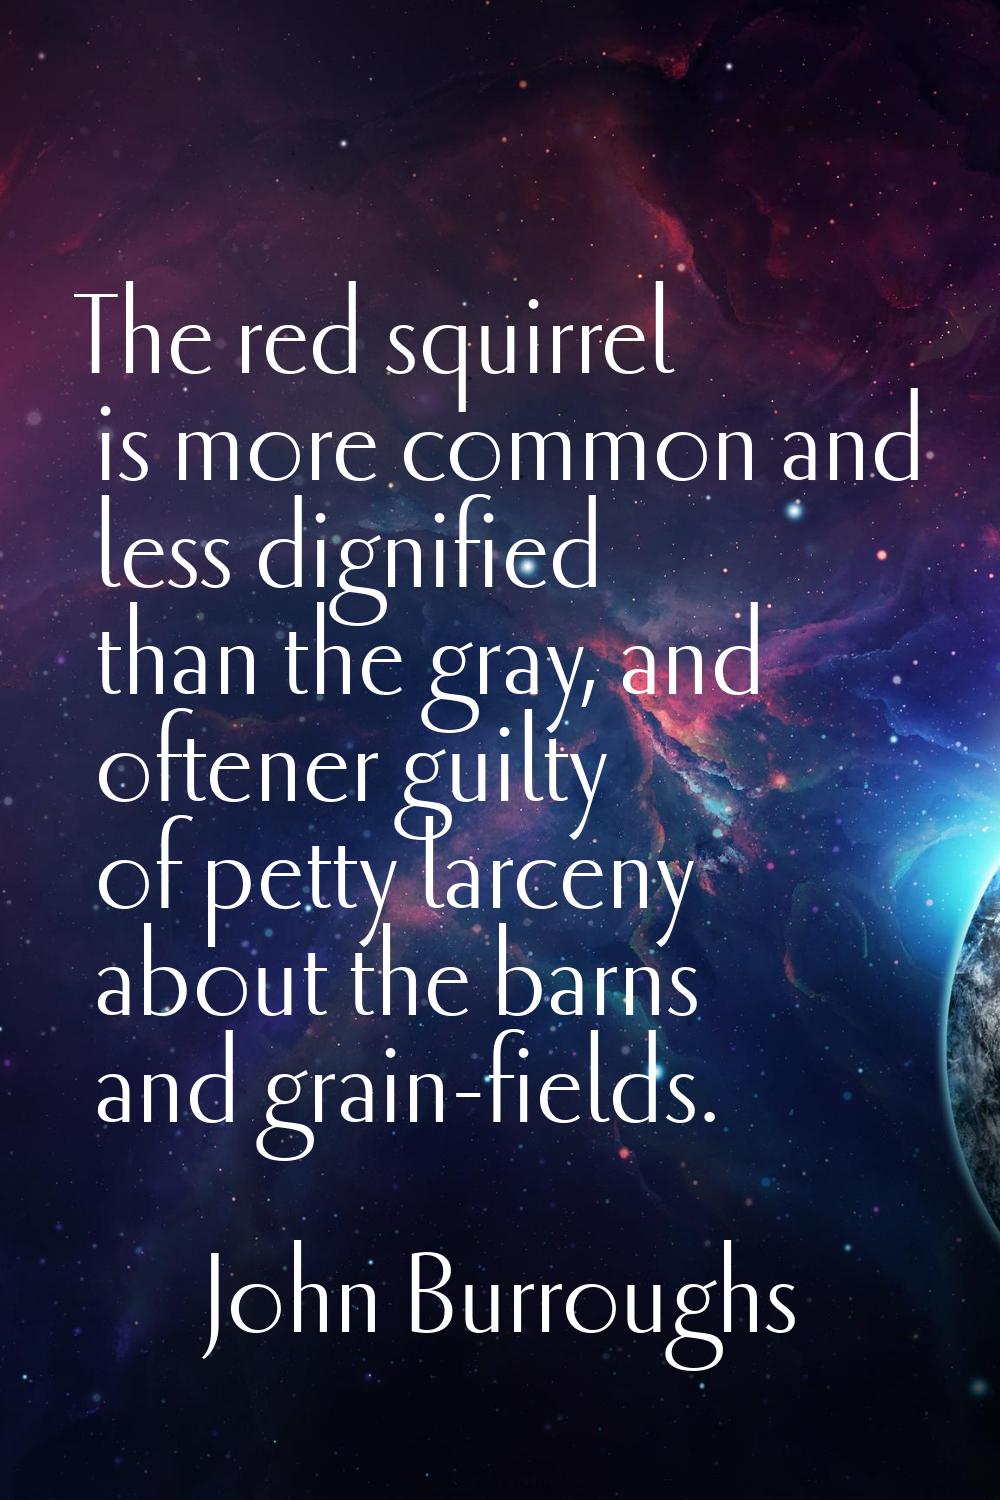 The red squirrel is more common and less dignified than the gray, and oftener guilty of petty larce